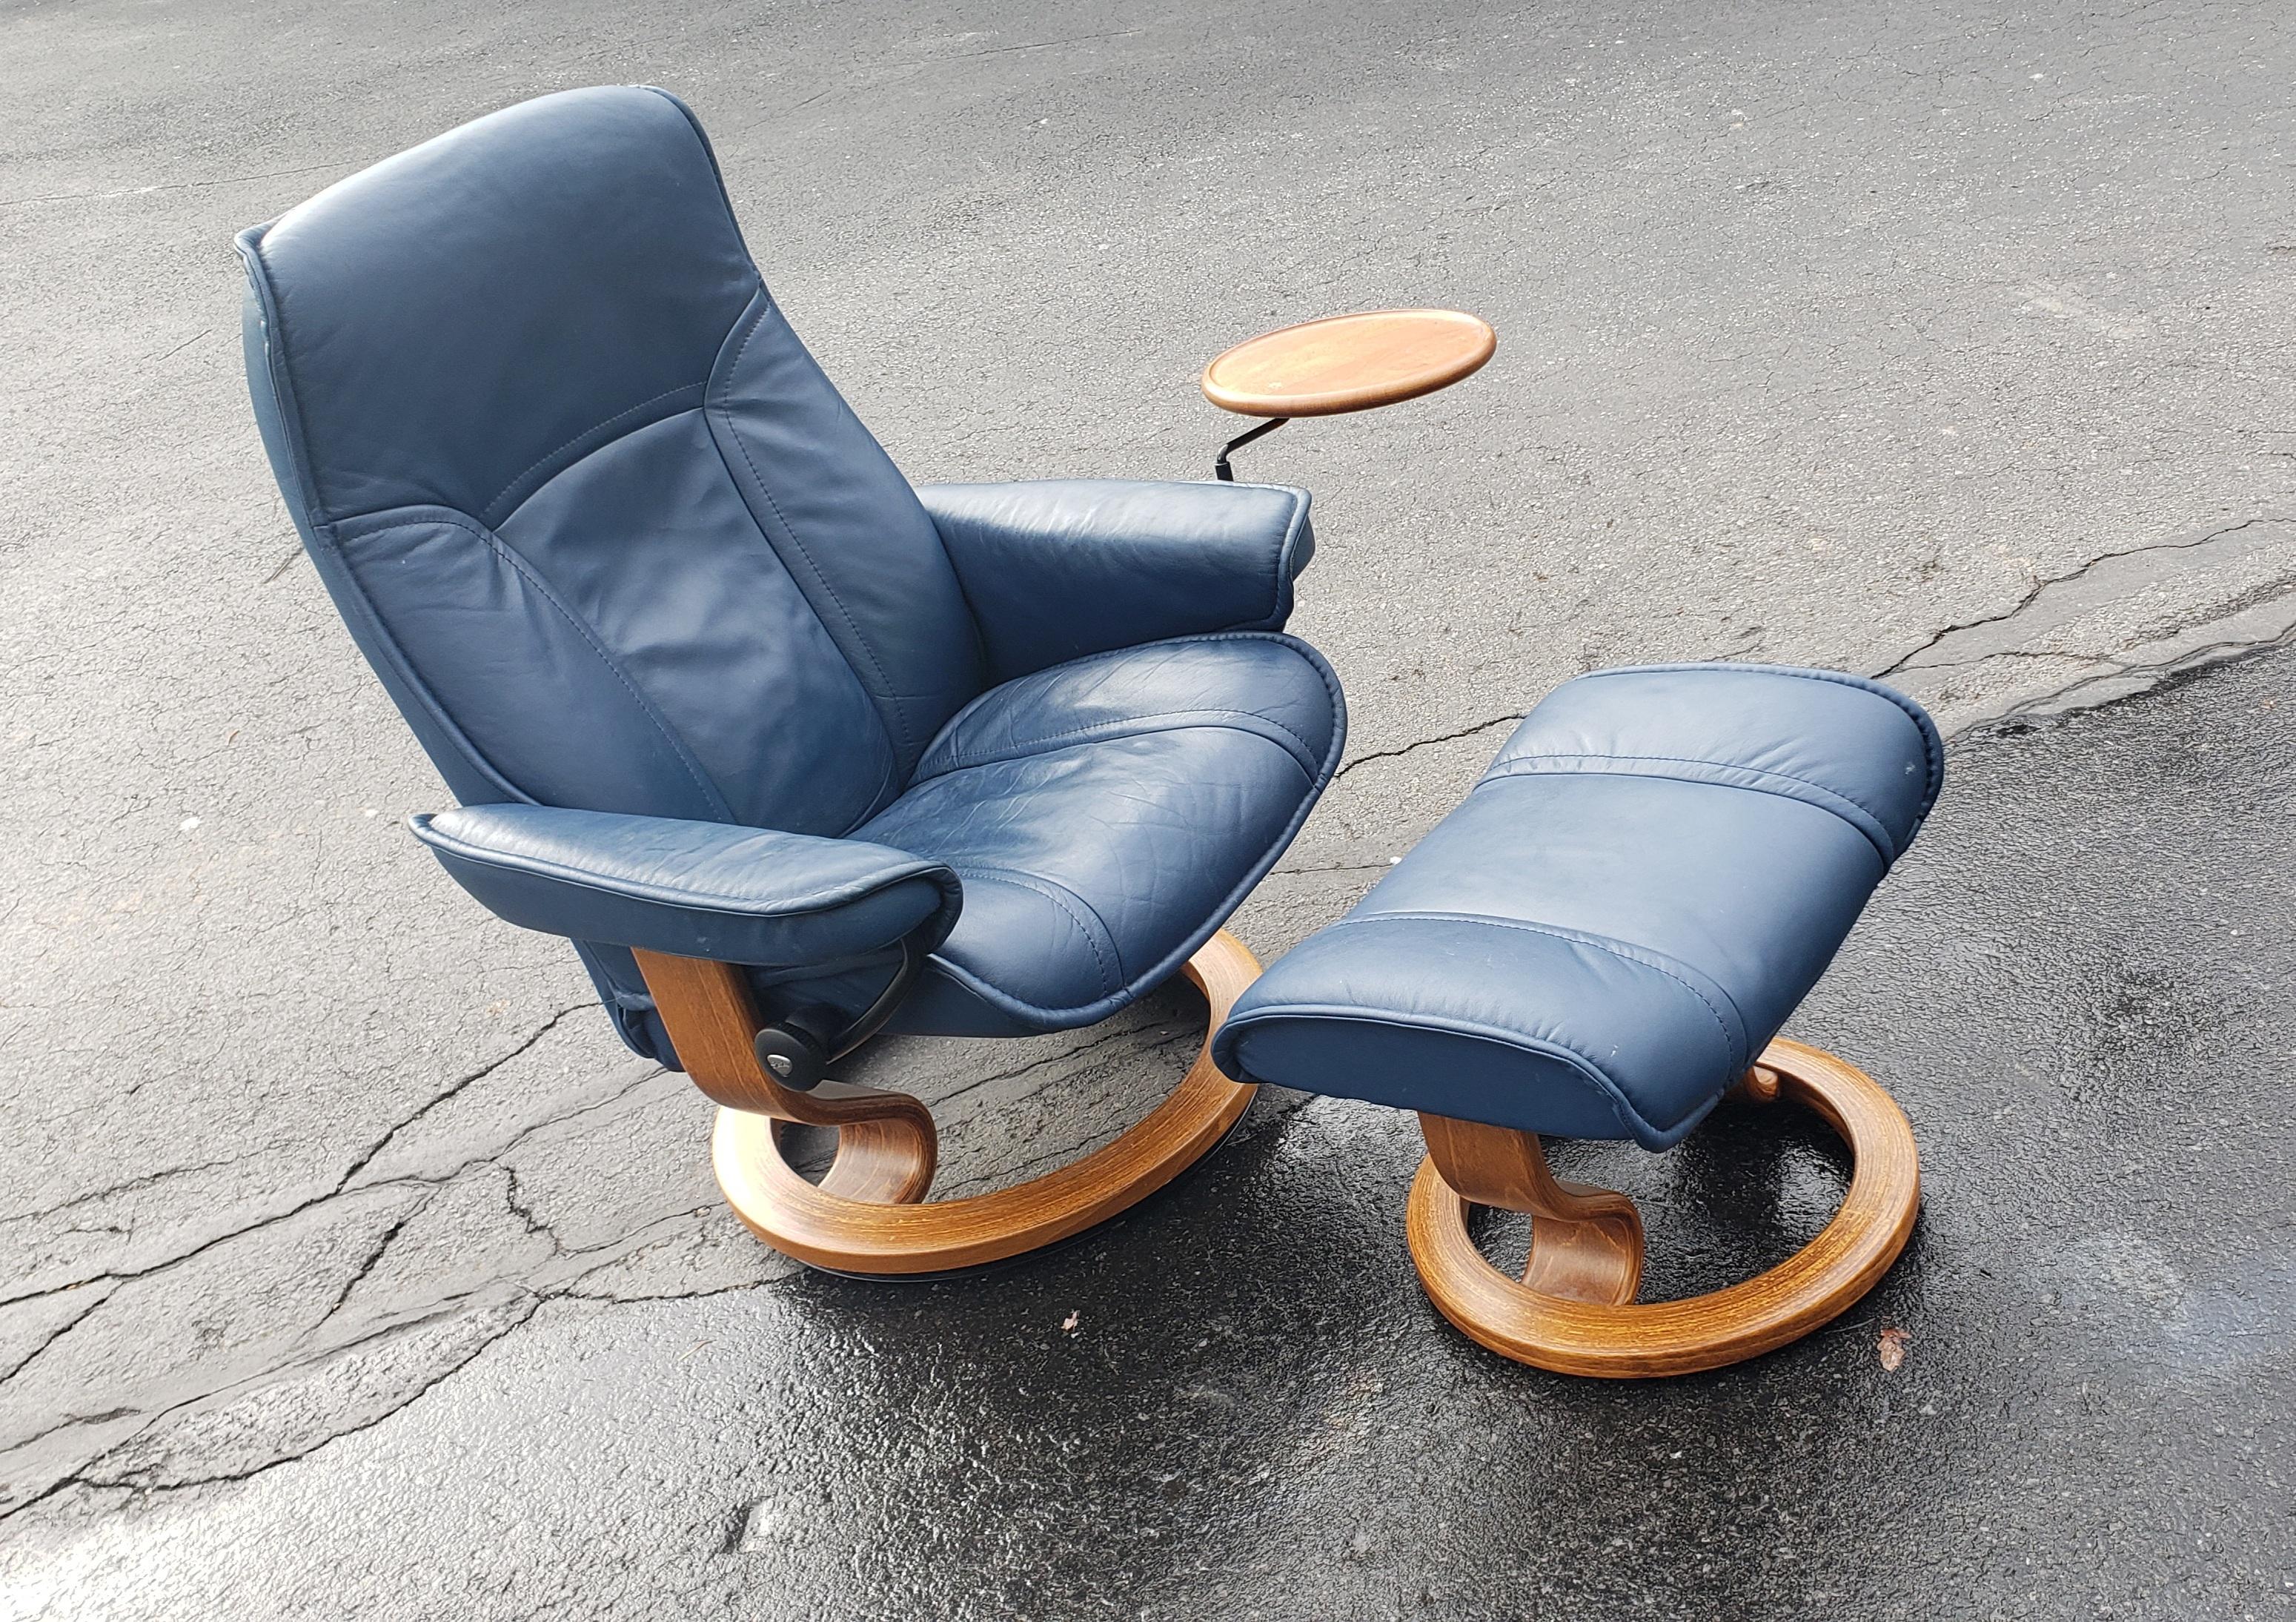 Ekornes Stressless leather and teak reclining lounge chair with matching Ottoman and drink tray.
Measures 30.5